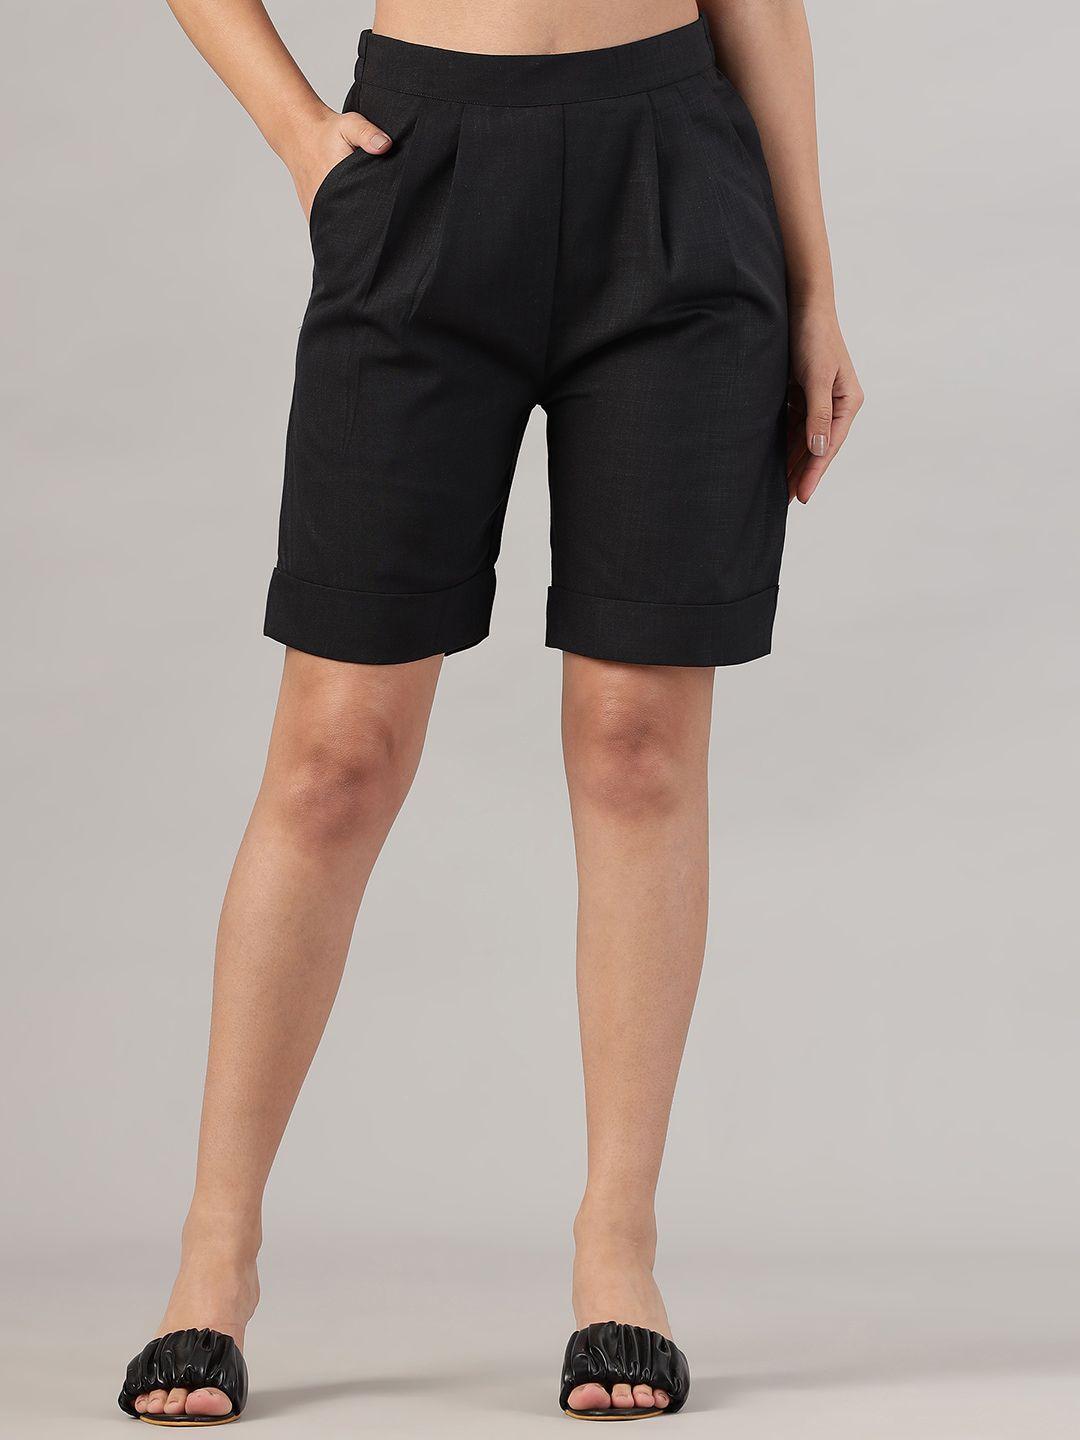 fithub-women-loose-fit-high-rise-cotton-regular-shorts